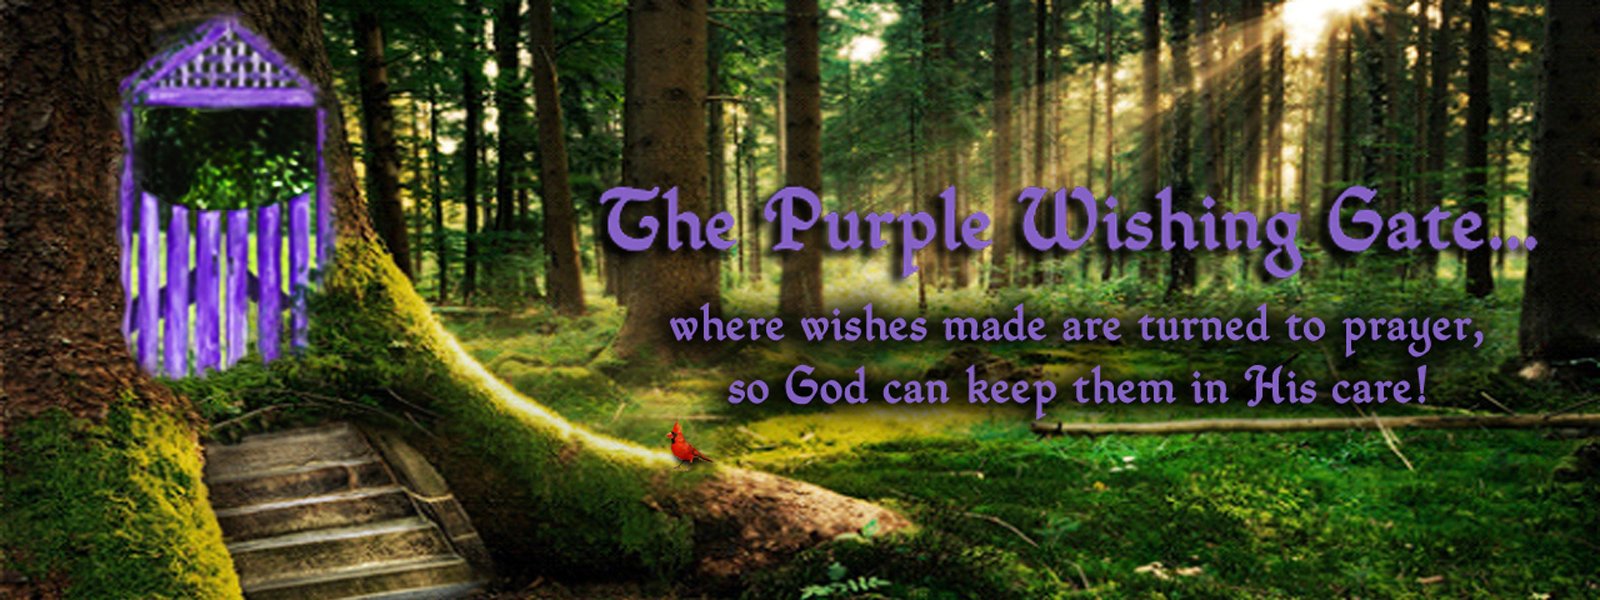 An Open Letter From Purple Wishing Gate Founder Barbara D MacAdam